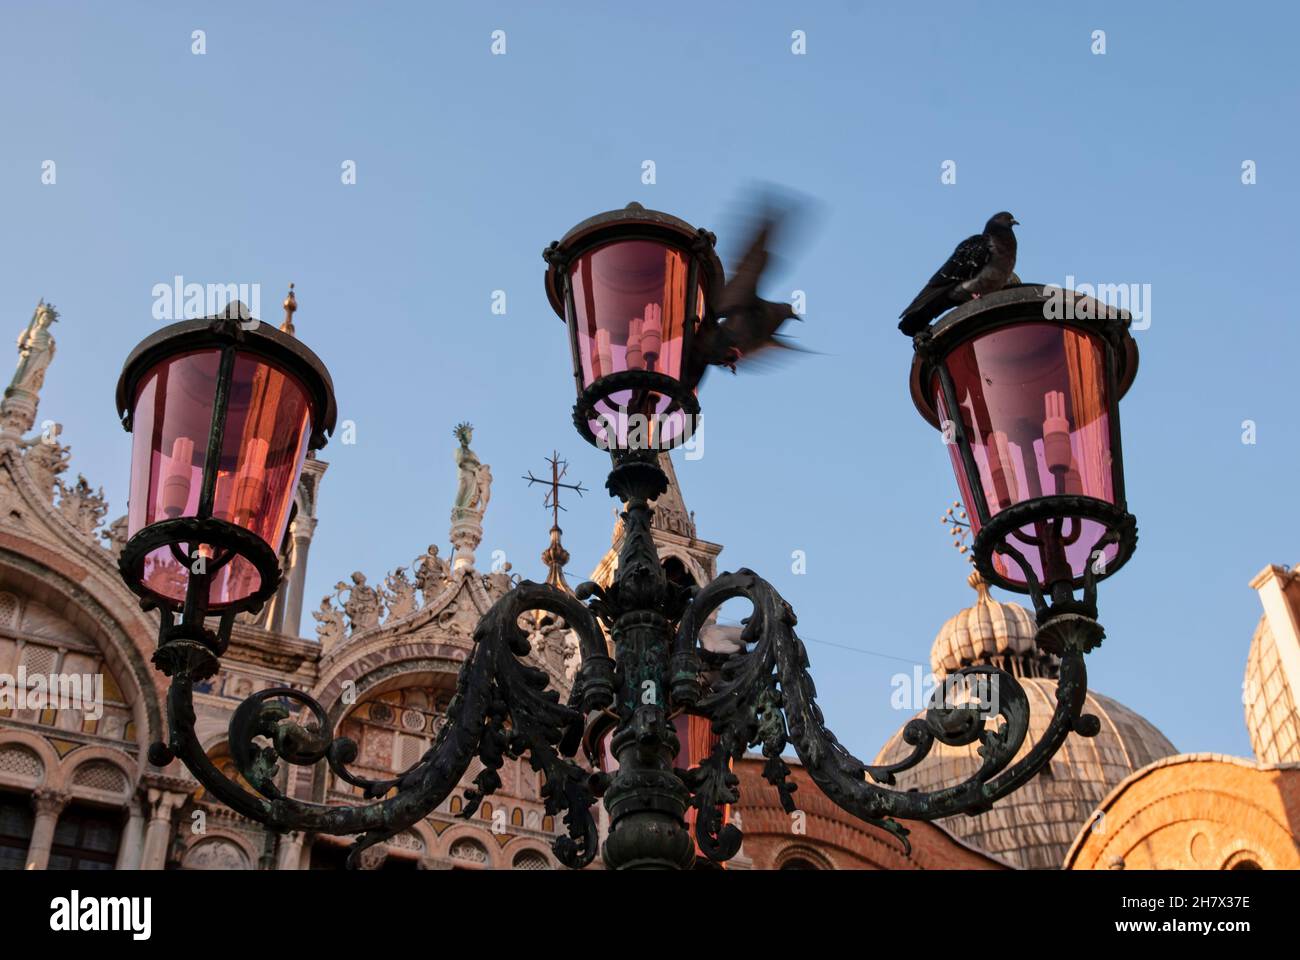 Bronze street lamp with flying pigeons, and in the background one of the facades of St. Mark's Cathedral in Venice Italy. Travel and tourism Stock Photo